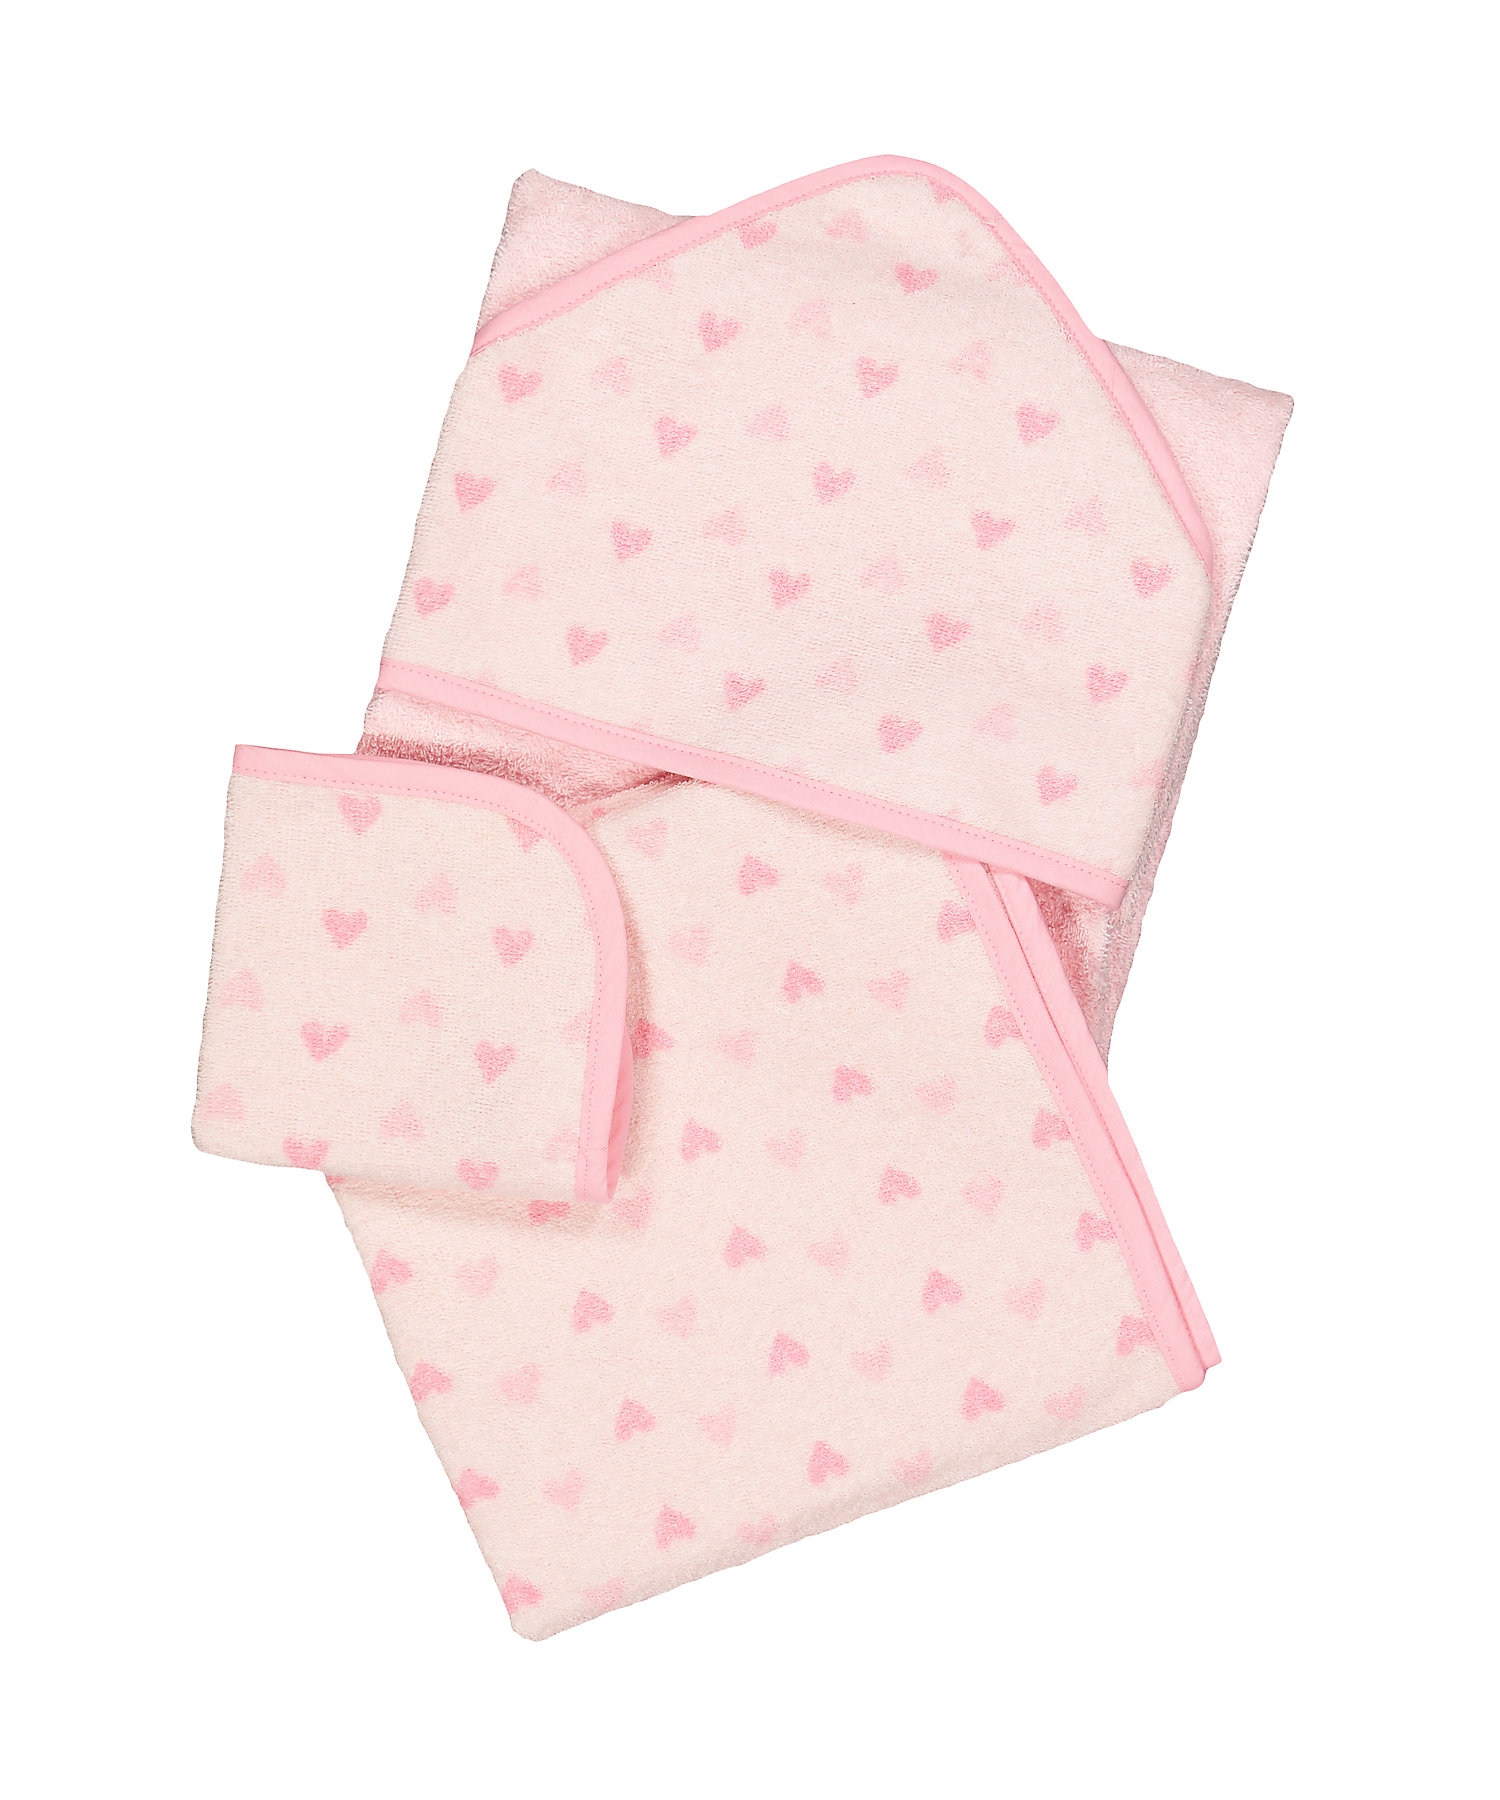 Mothercare | Pink Towel Bale - Pack of 3